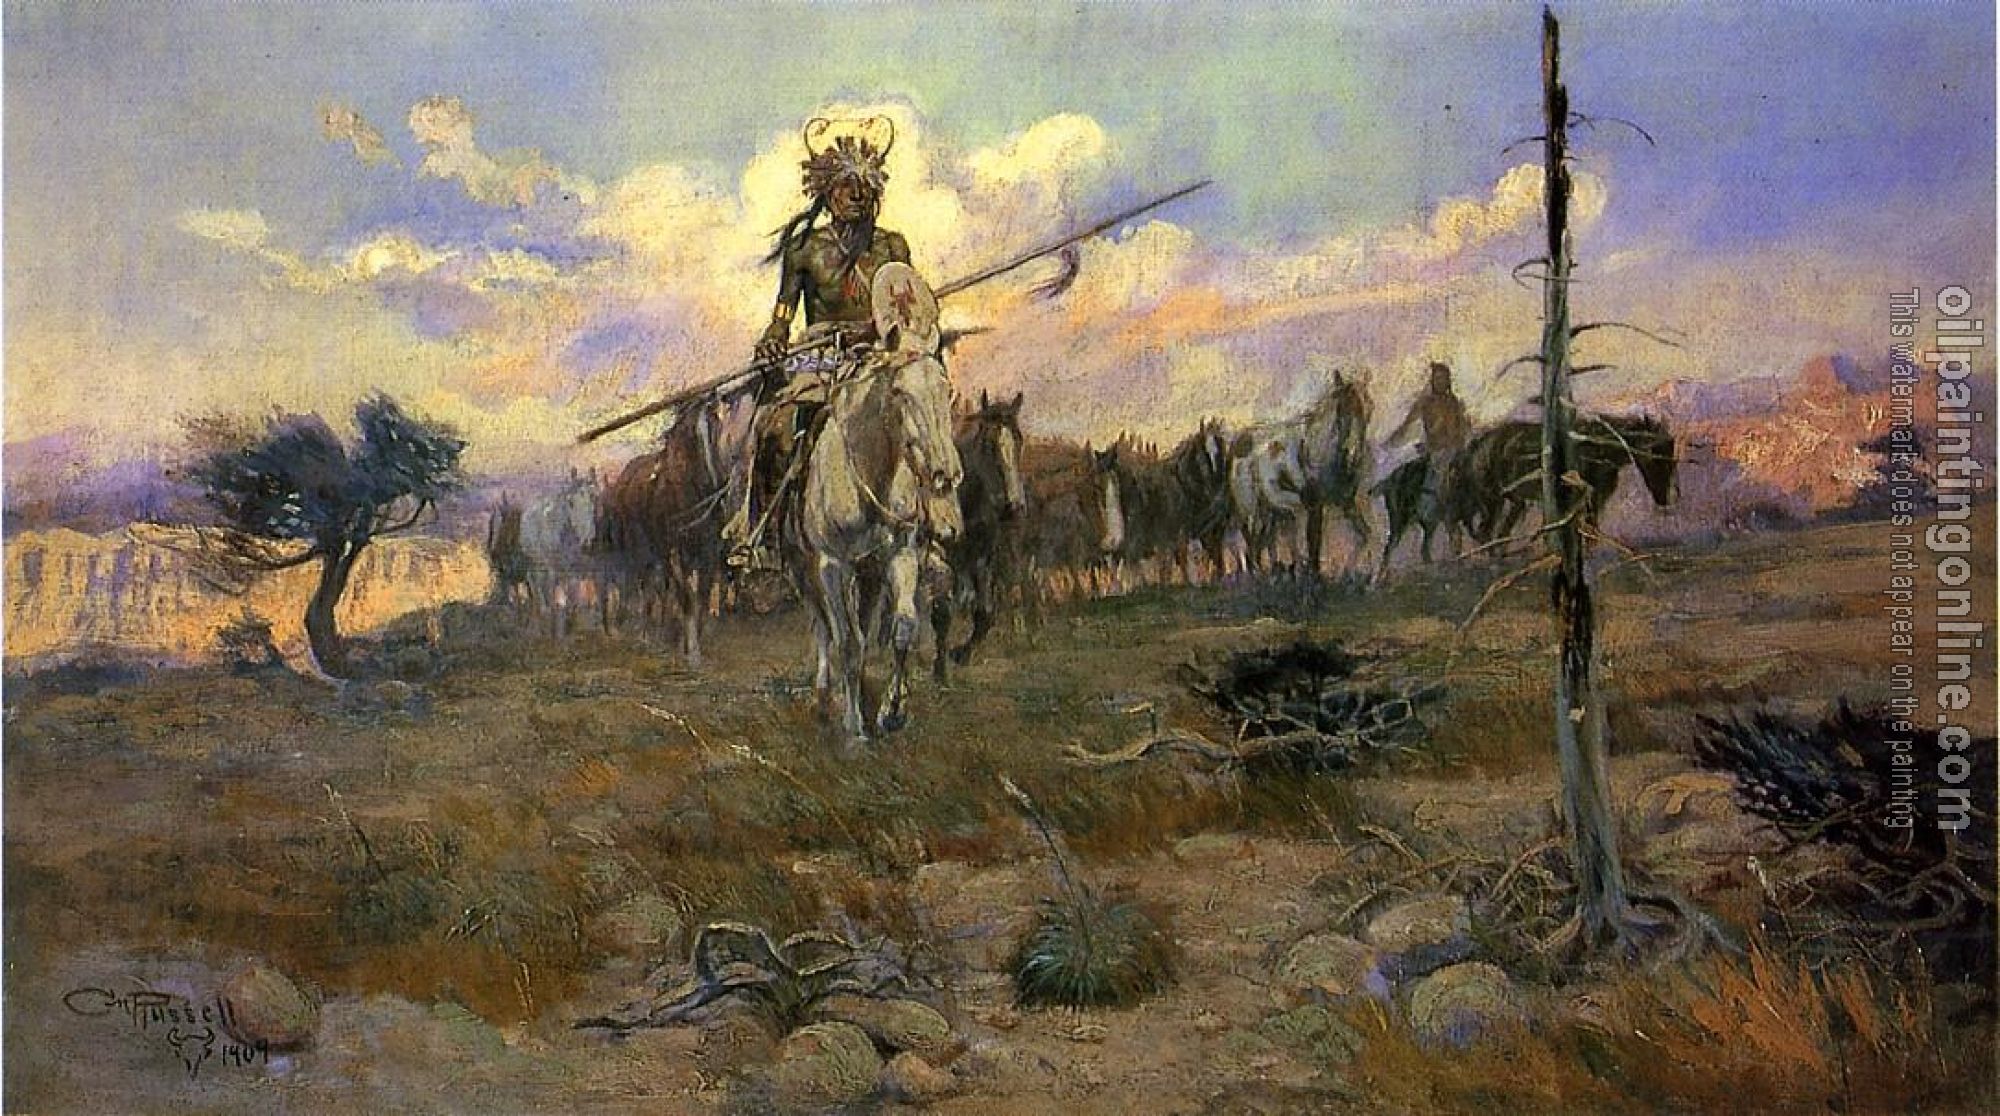 Charles Marion Russell - Bringing Home the Spoils